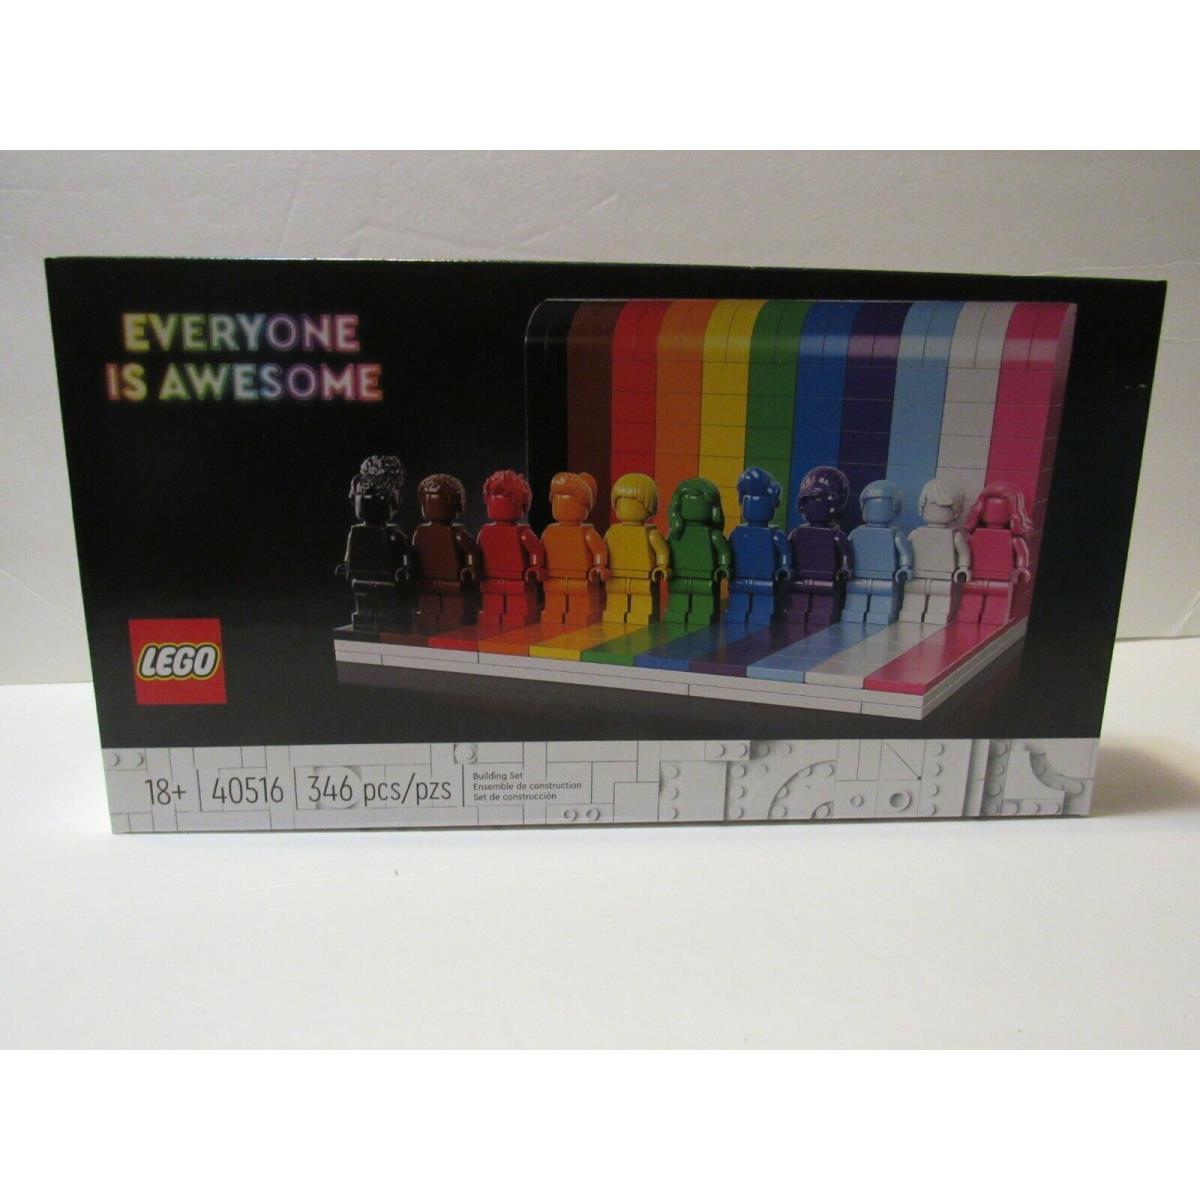 Lego Everyone Is Awesome 40516 Ages 18+ 346 Pieces